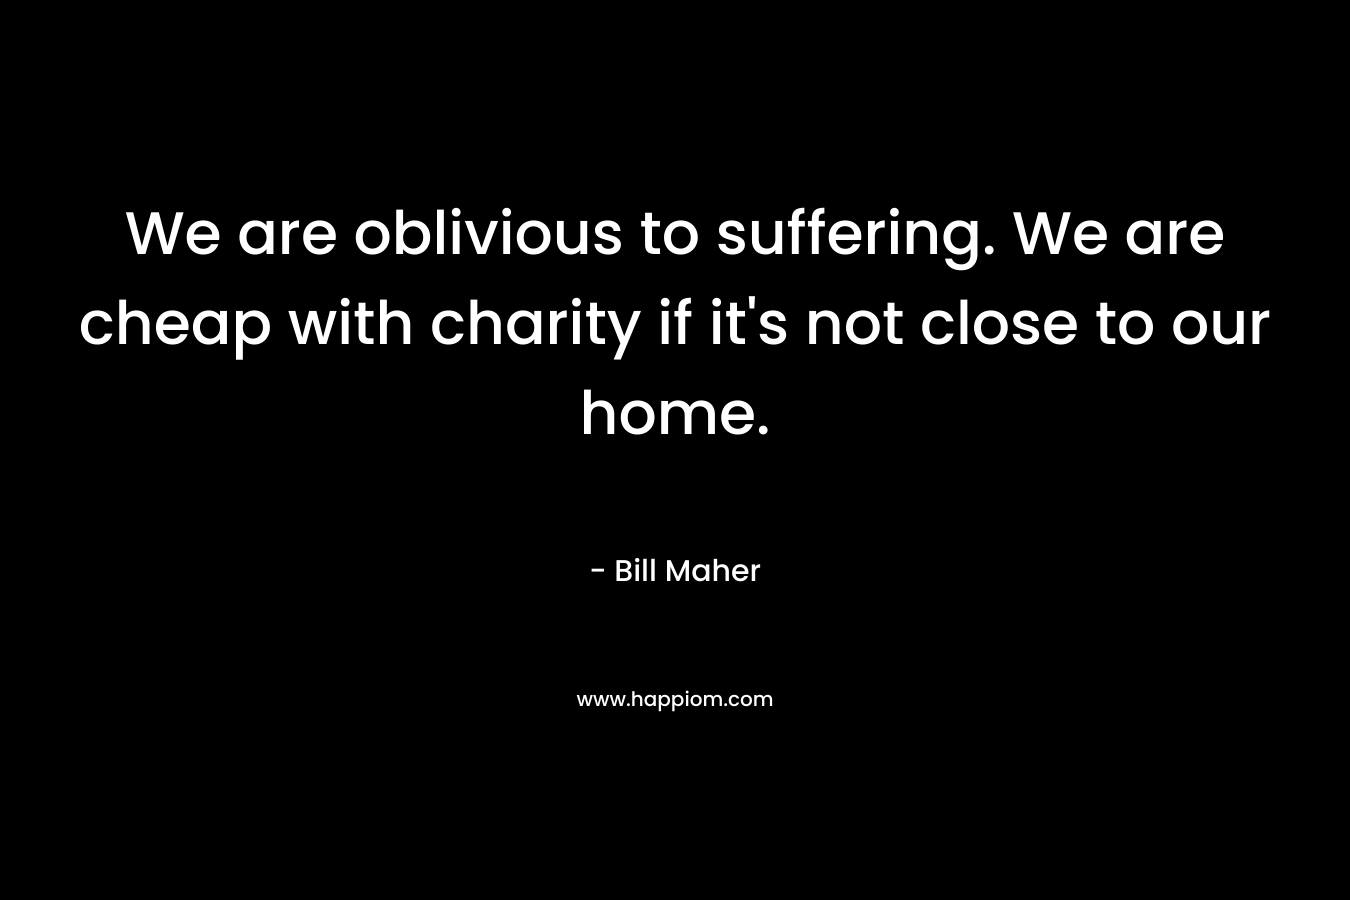 We are oblivious to suffering. We are cheap with charity if it’s not close to our home. – Bill Maher